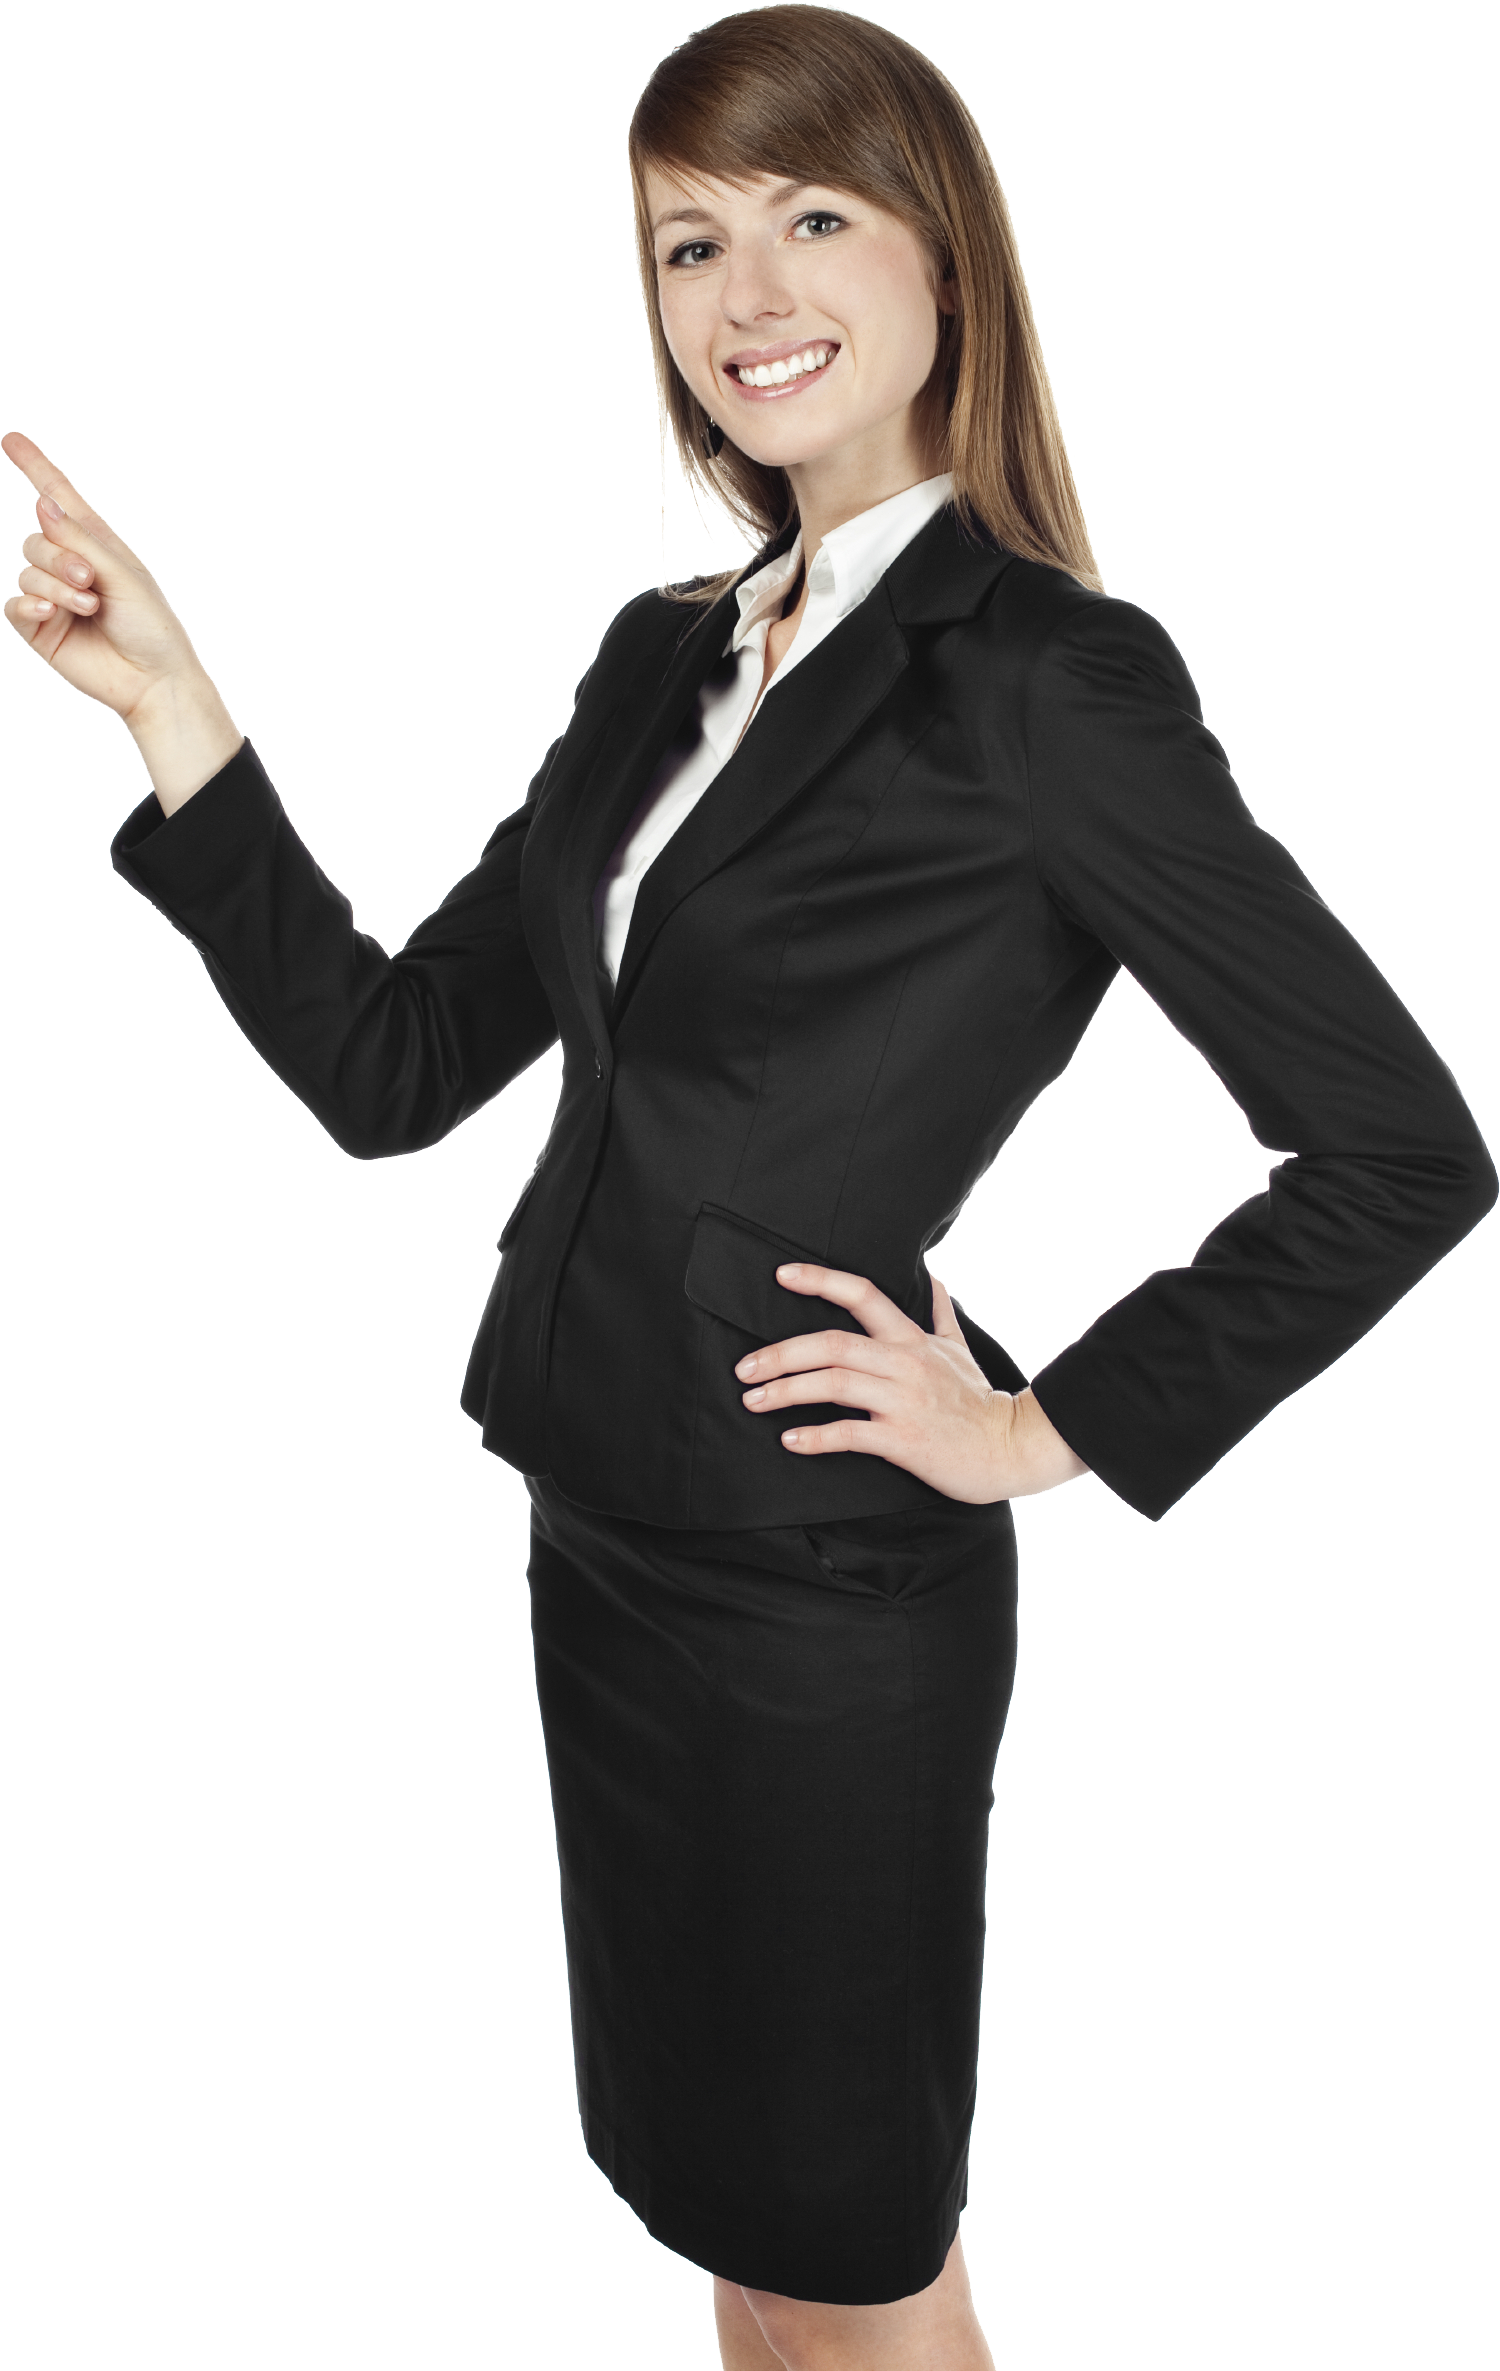 Download PNG image - Professional Business Woman PNG Image 